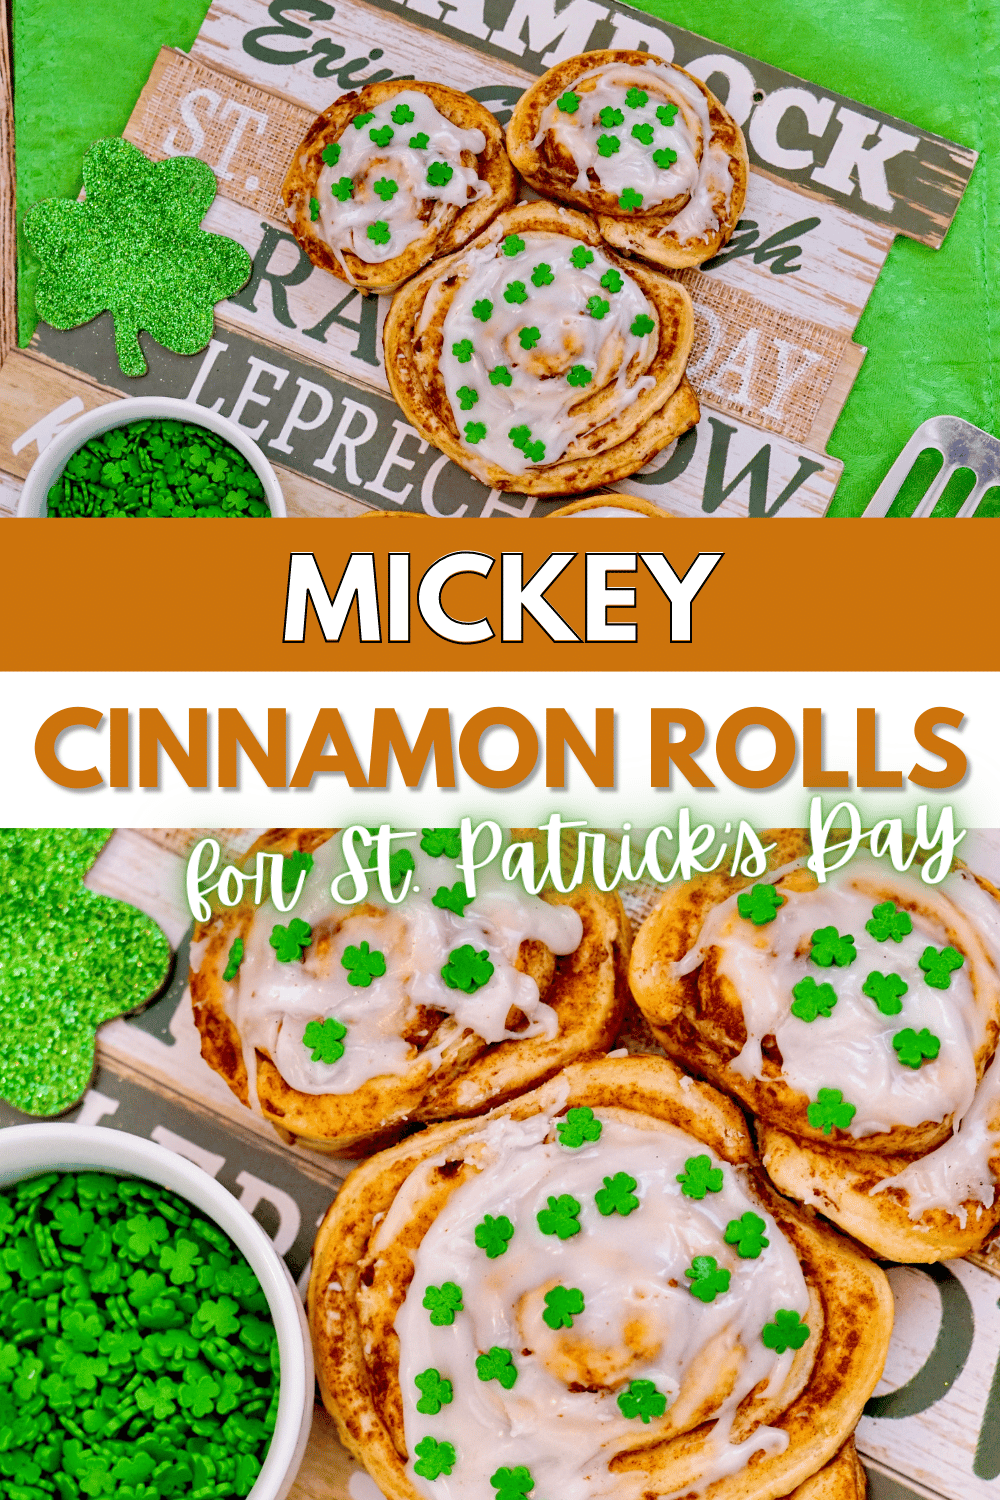 These Mickey Cinnamon Rolls for St. Patrick’s Day are the perfect way to celebrate the holiday. They are a quick yet festive breakfast. #mickeycinnamonrolls #stpatricksday #cinnamonrolls #mickeymouse #breakfast via @wondermomwannab